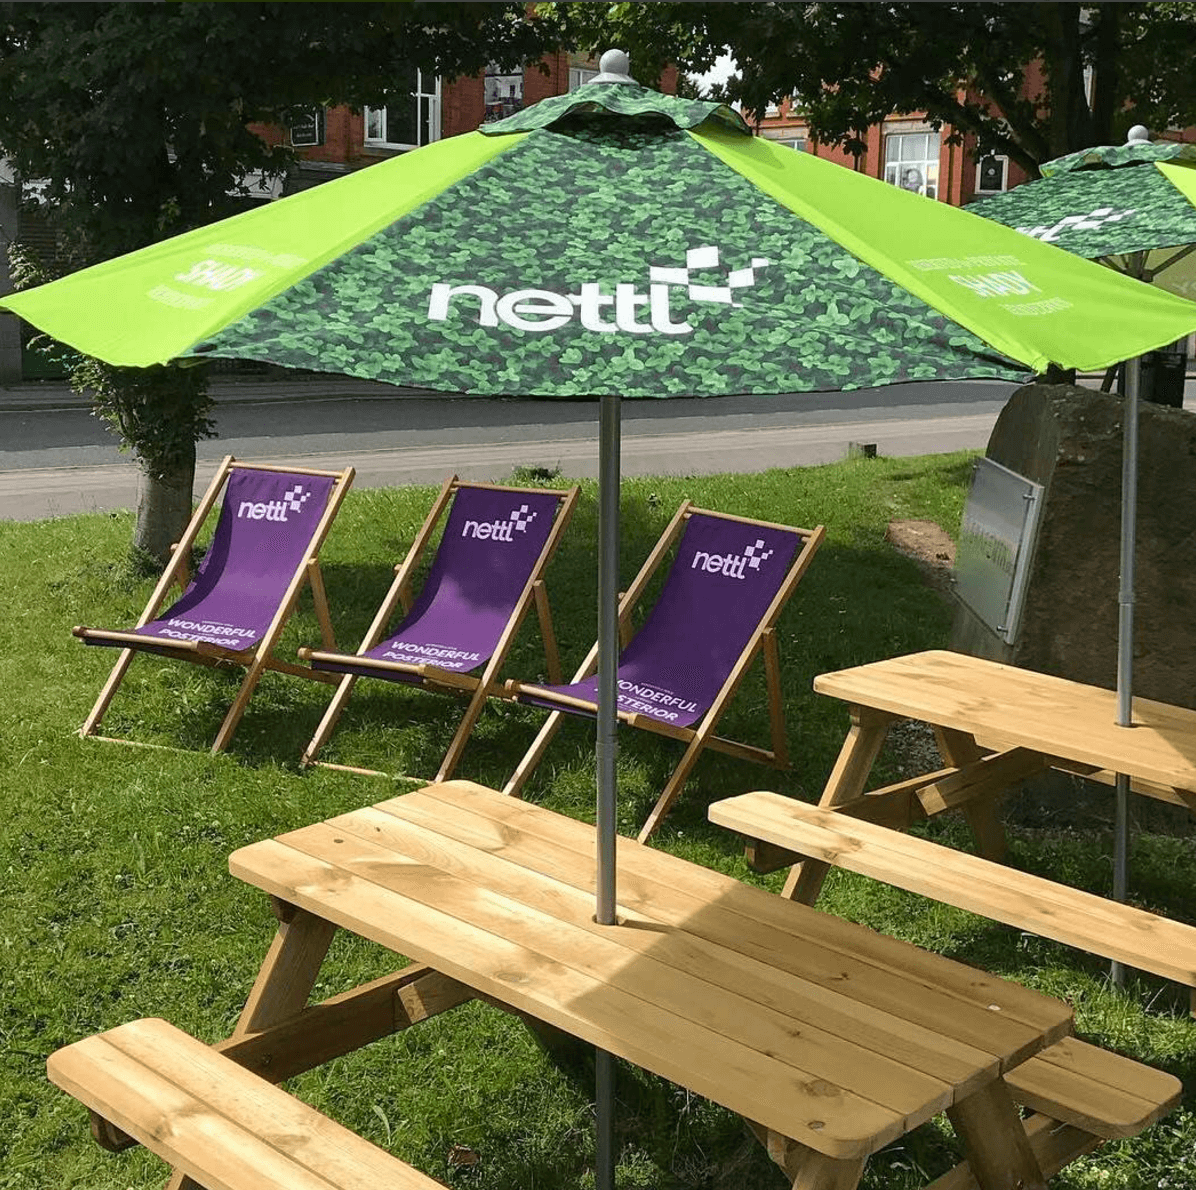 branded parasol umbrella and deckchair outside